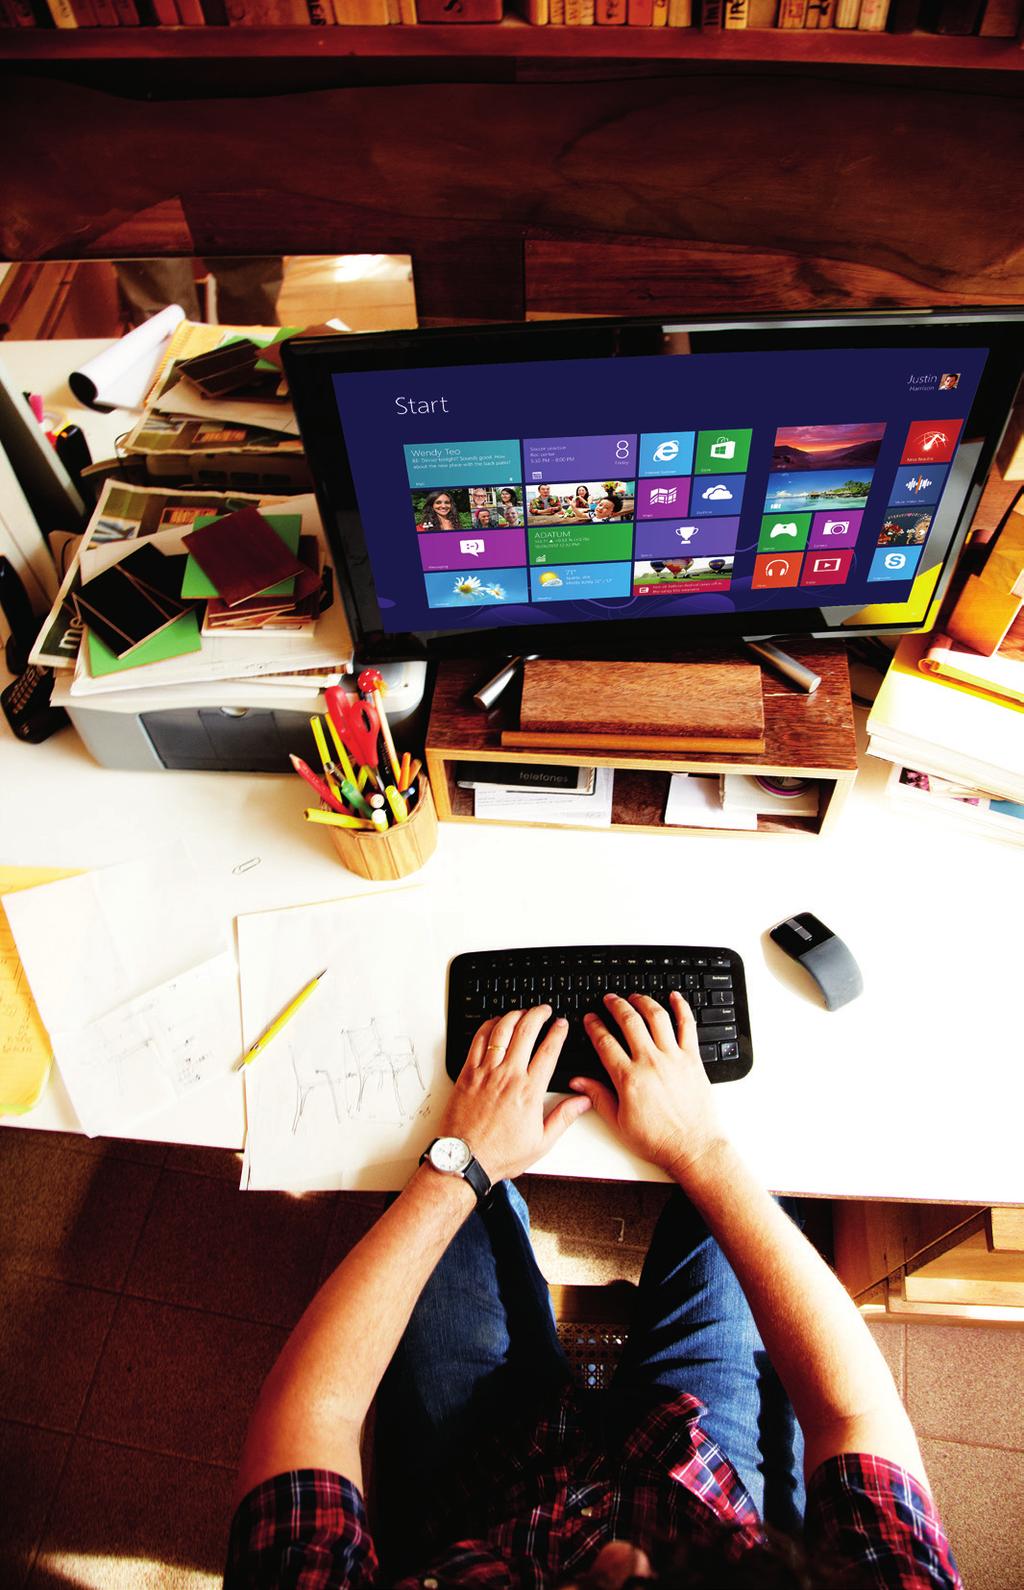 Windows 8 Ecosystem The Windows 8 Ecosystem provides a Modern IT Experience that embraces current consumerization trends but it also offers much more, delivering a robust platform and user experience